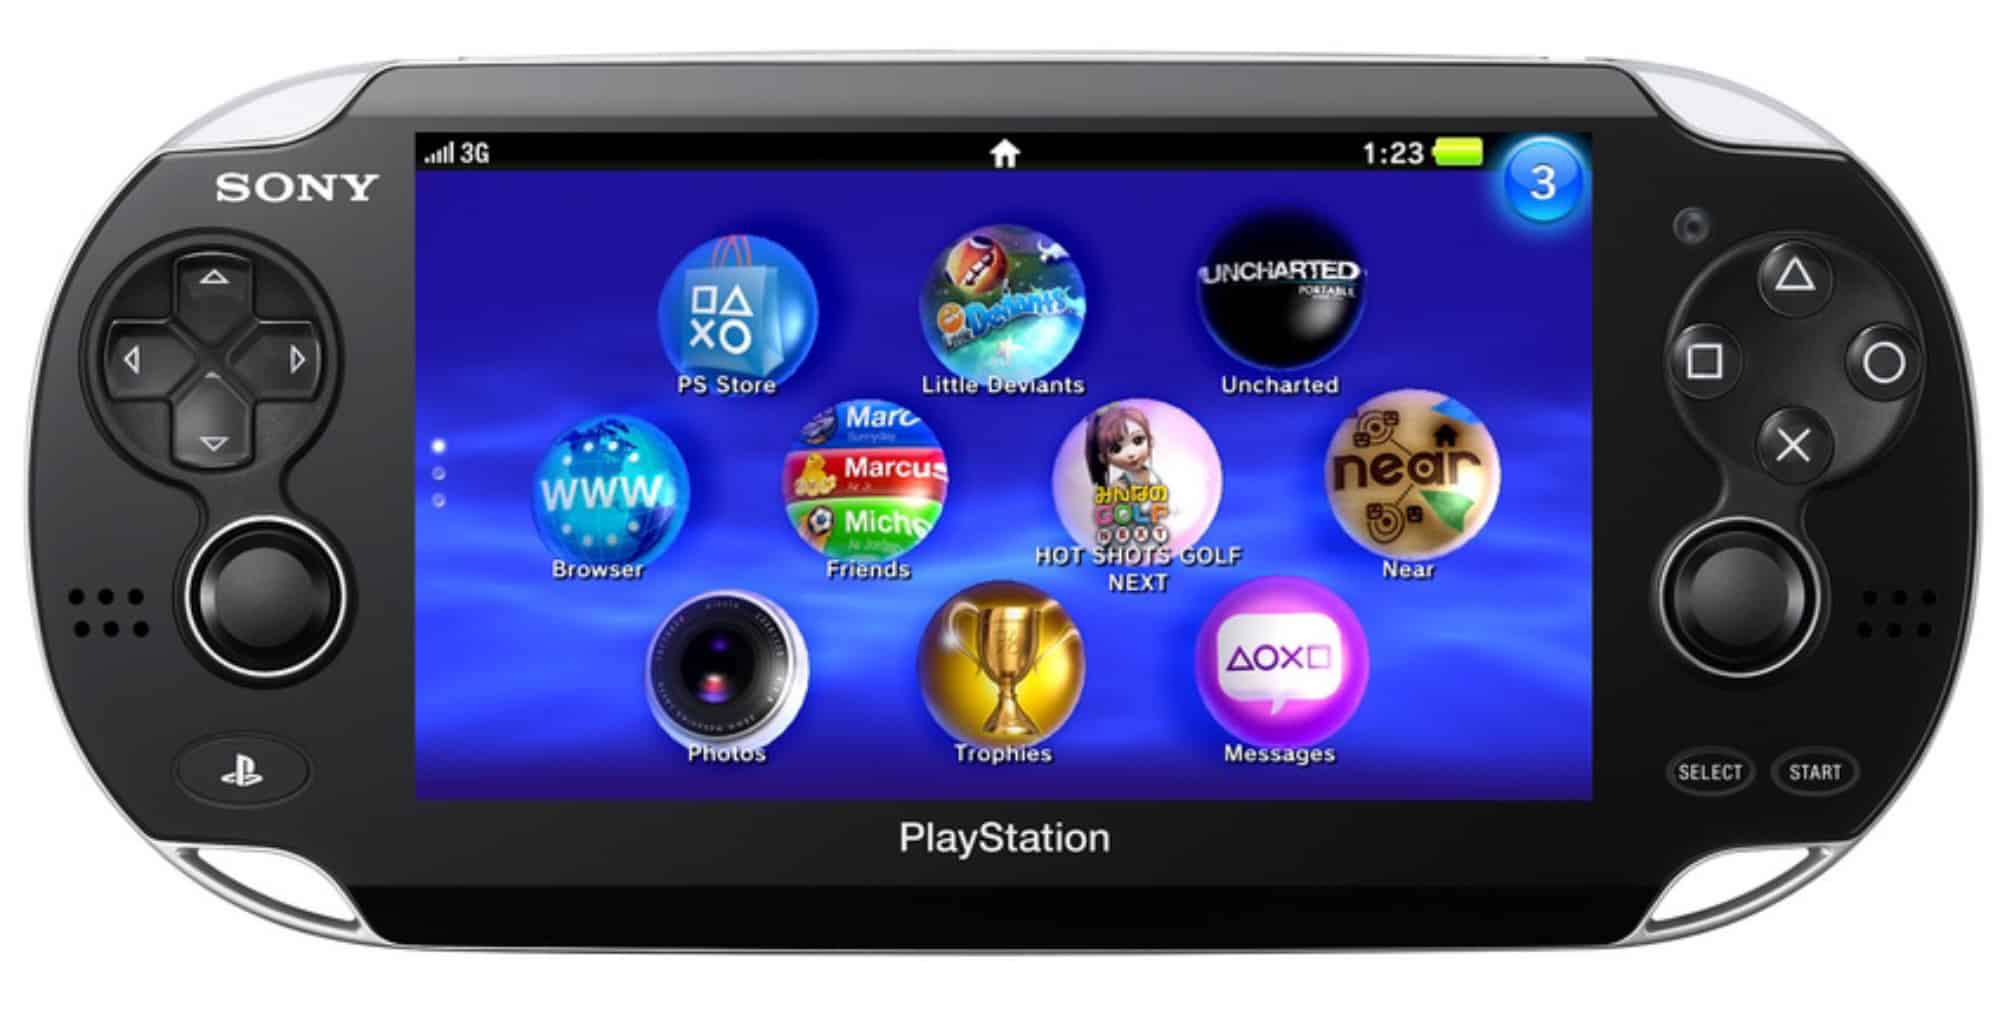 playstation-vita-or-ps-vita-is-the-official-name-for-sony-s-next